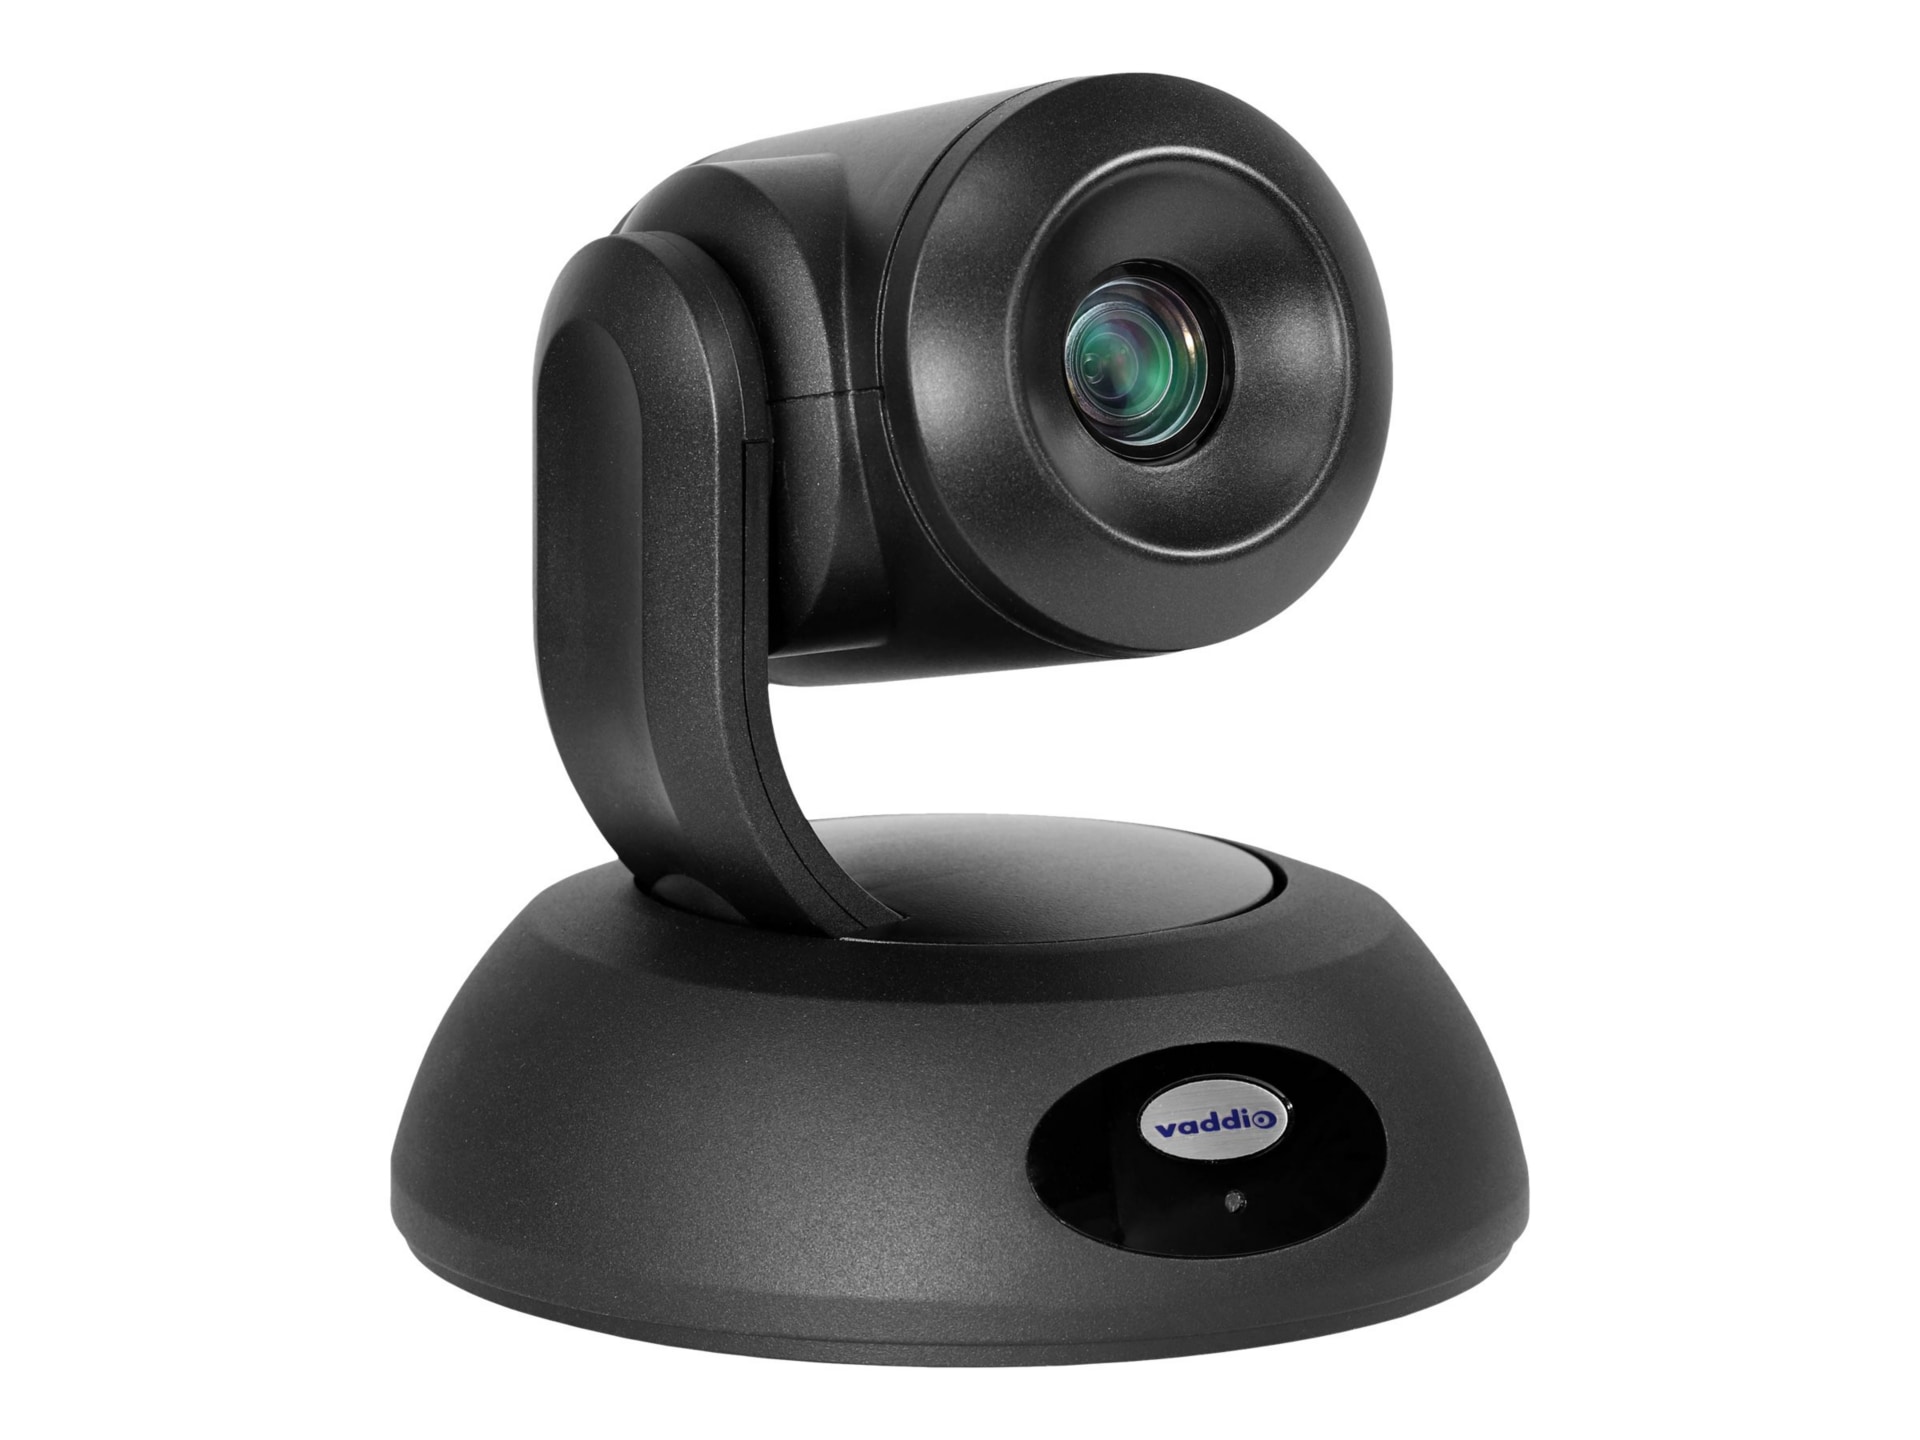 Vaddio RoboSHOT 12E HDBT OneLINK Bridge Video Conferencing System - Includes PTZ Camera and Interface - Black